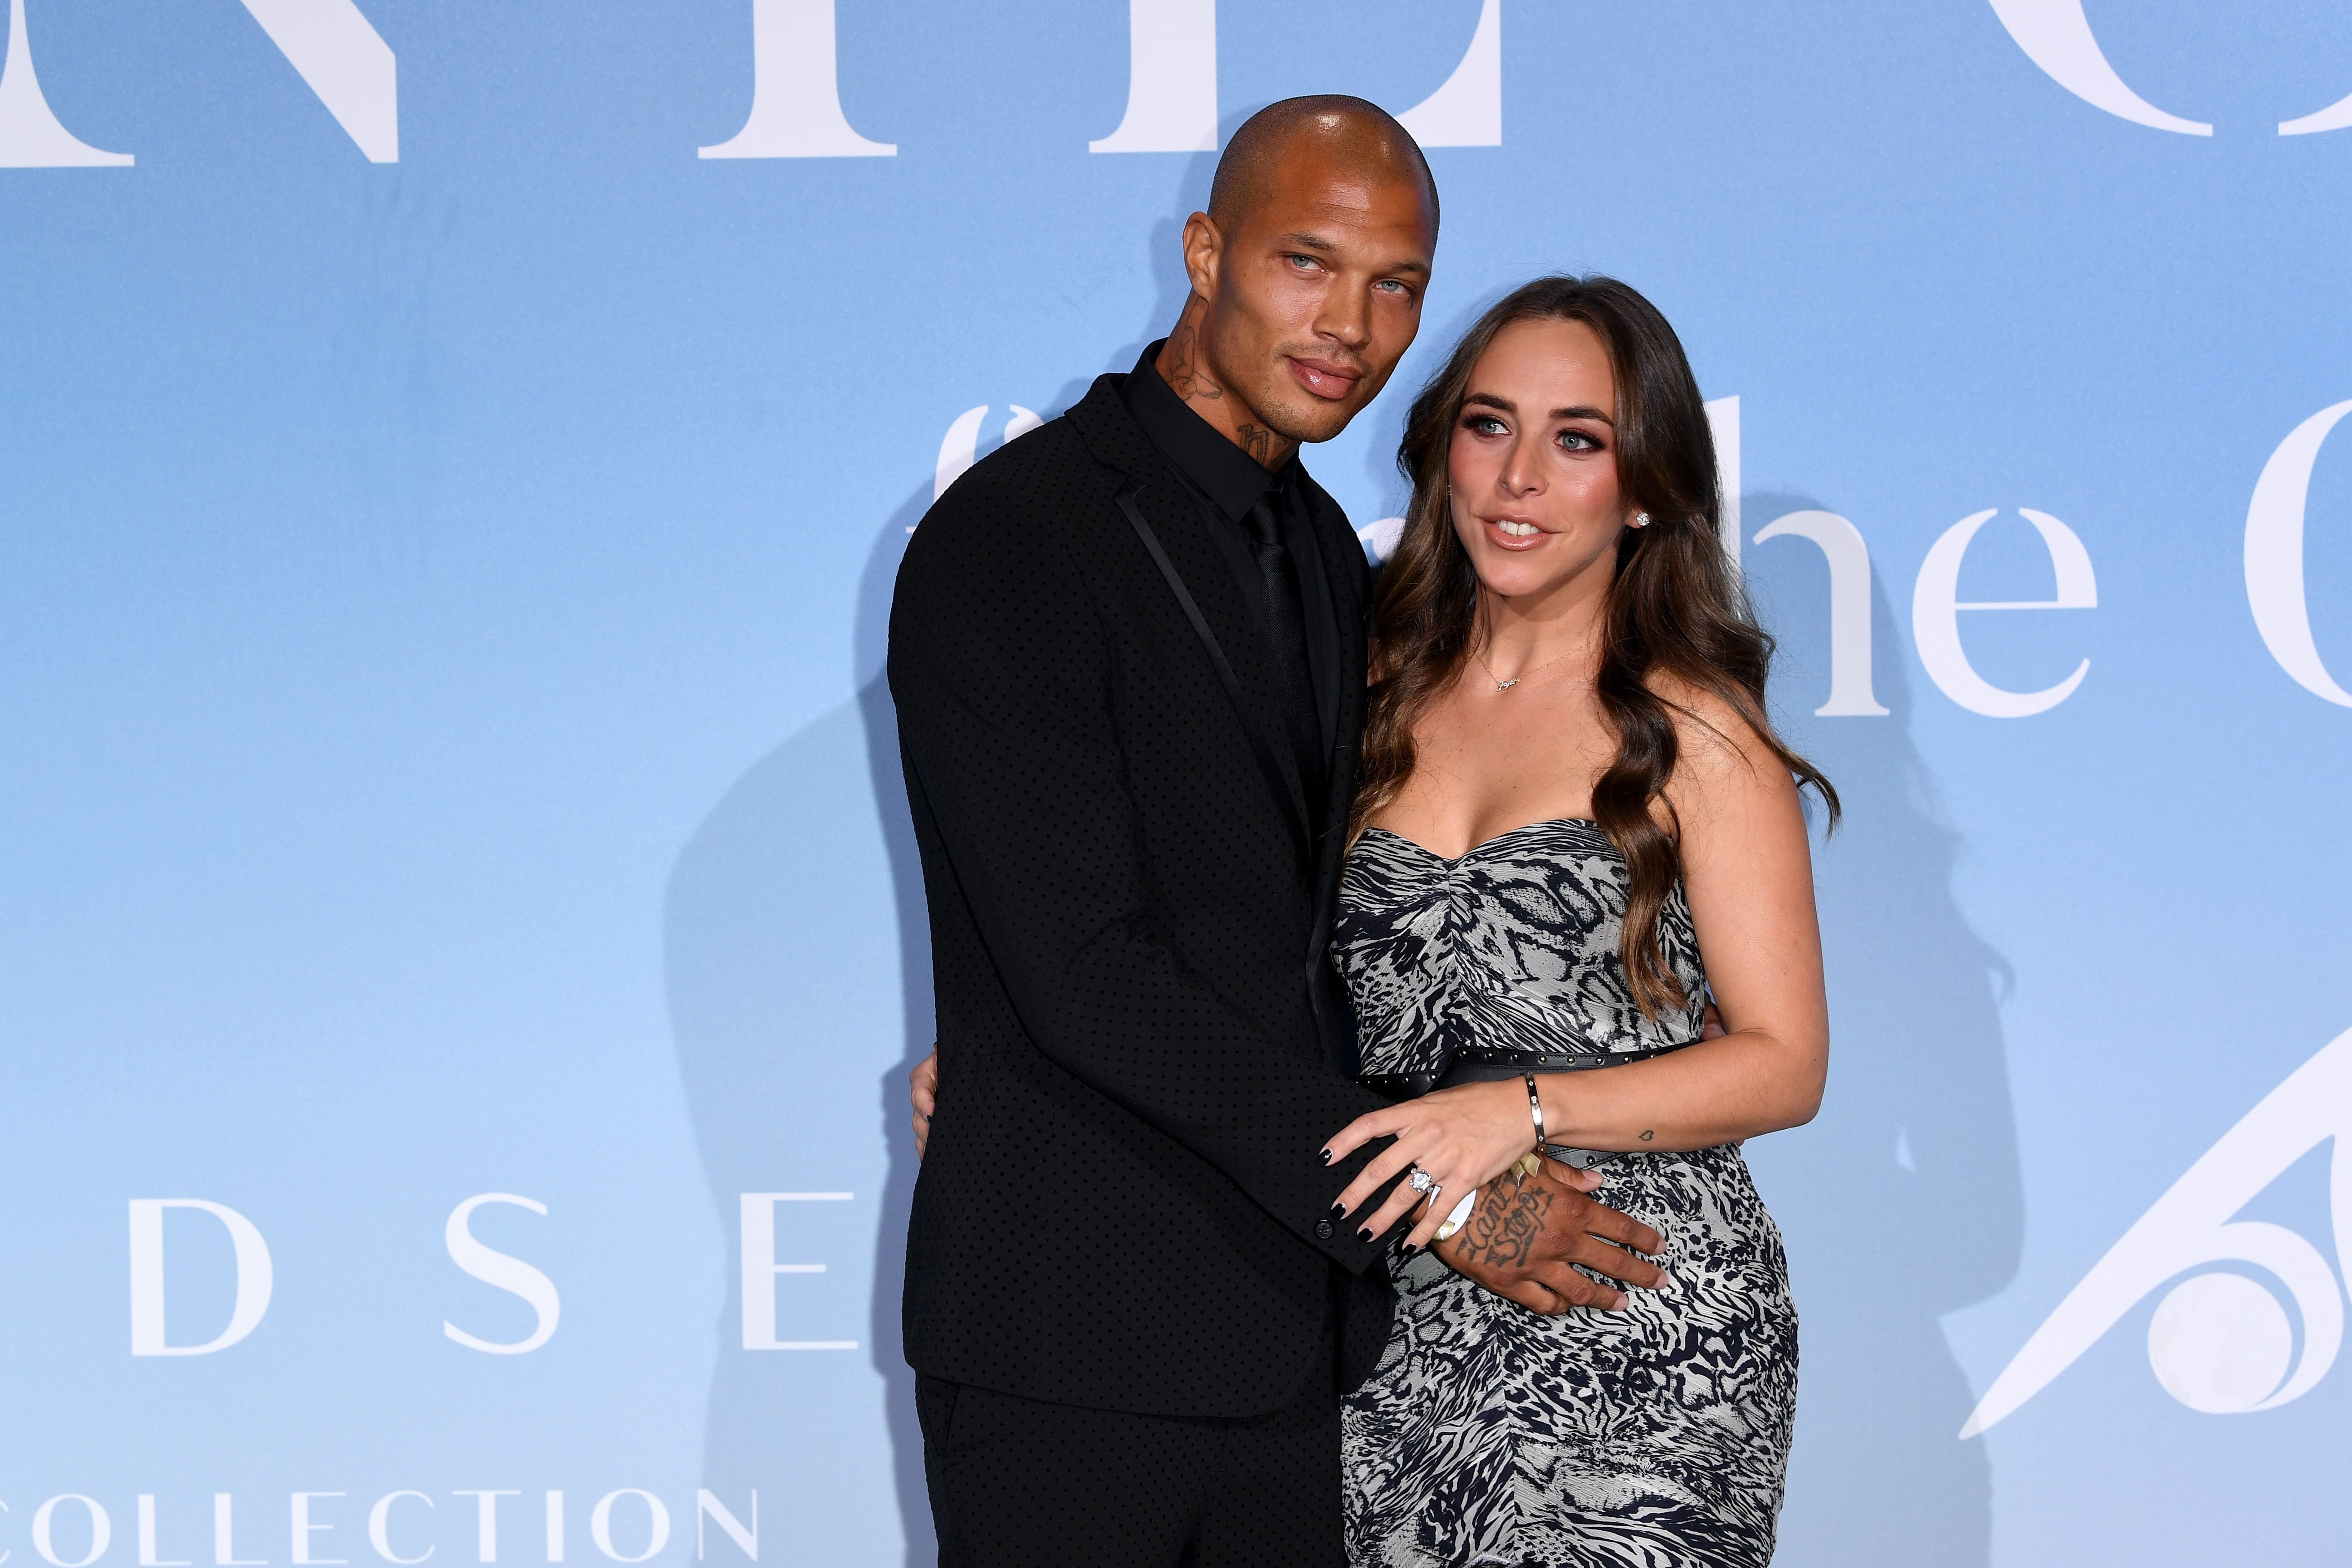 Jeremy Meeks and Chloe Green at the Gala for the Global Ocean hosted by H.S.H. Prince Albert II of Monaco in 2018 in Monte-Carlo | Source: Getty Images